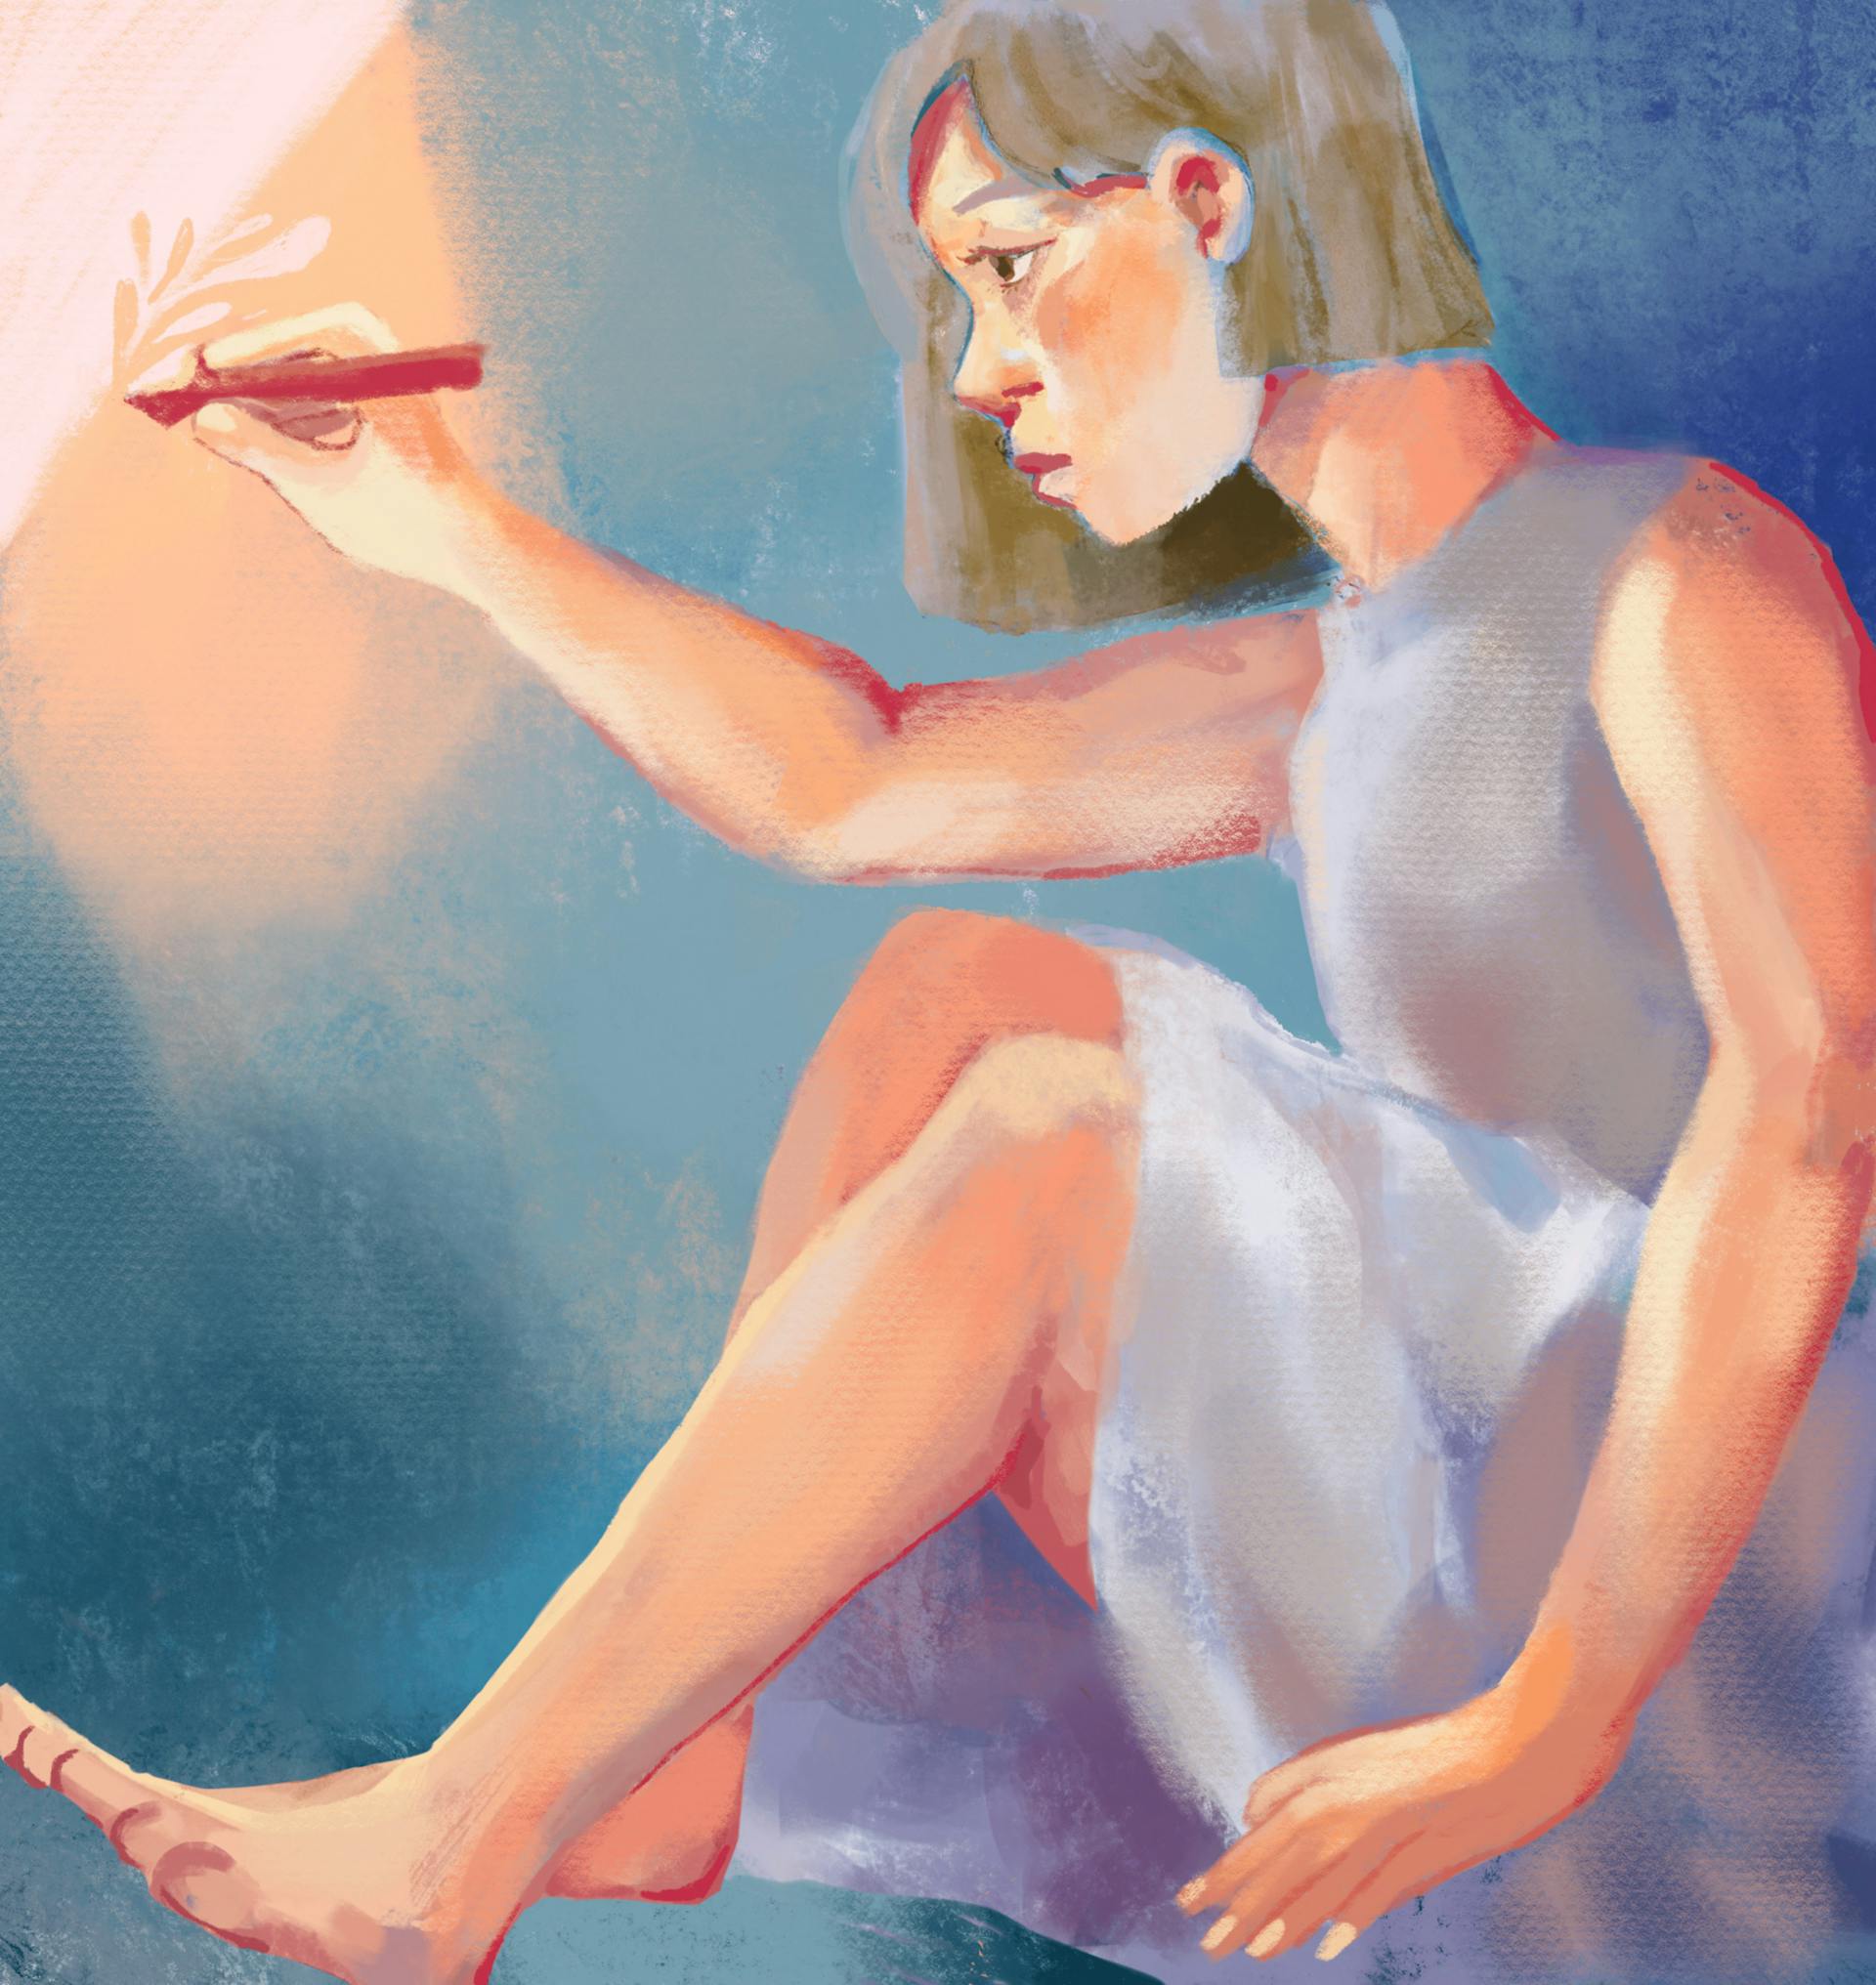 A digital painting of a focused woman sitting on the ground and drawing a rectangle